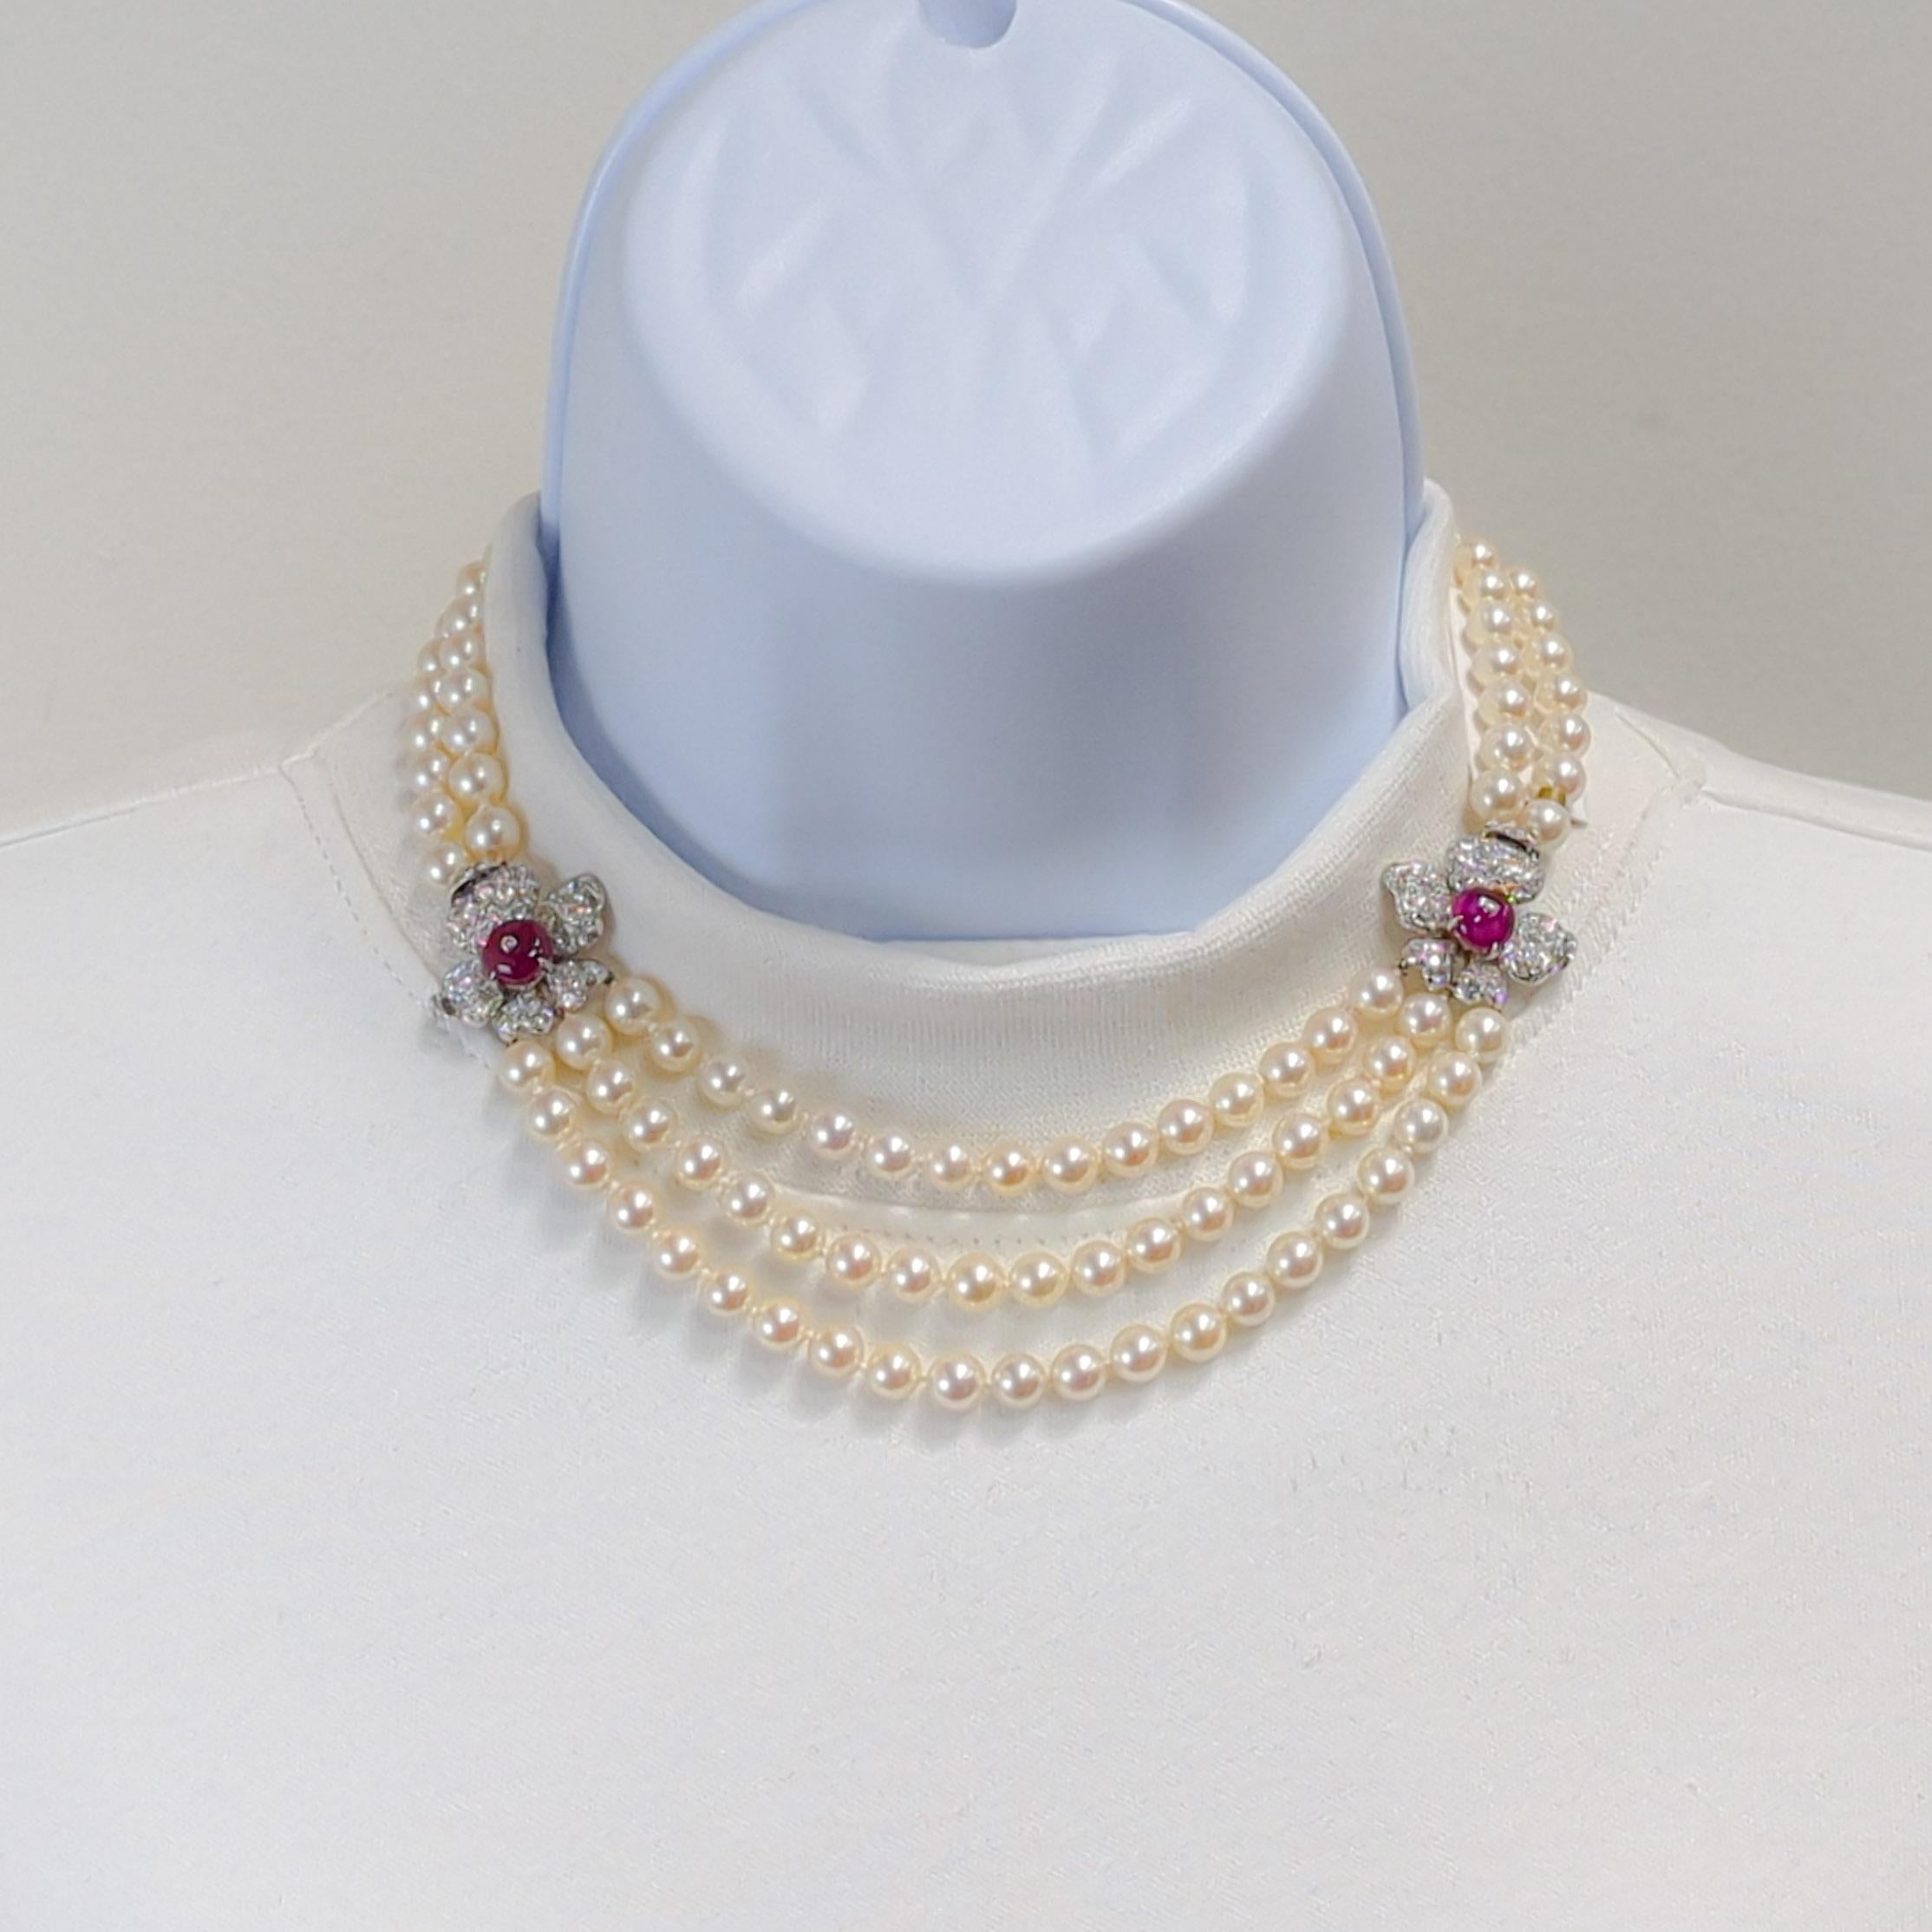 Gorgeous estate Marianne Ostier white pearl necklace with AGL certified unheated Burmese ruby rounds and good quality white diamond rounds.  Handmade in platinum with great attention to detail.  Length is 16